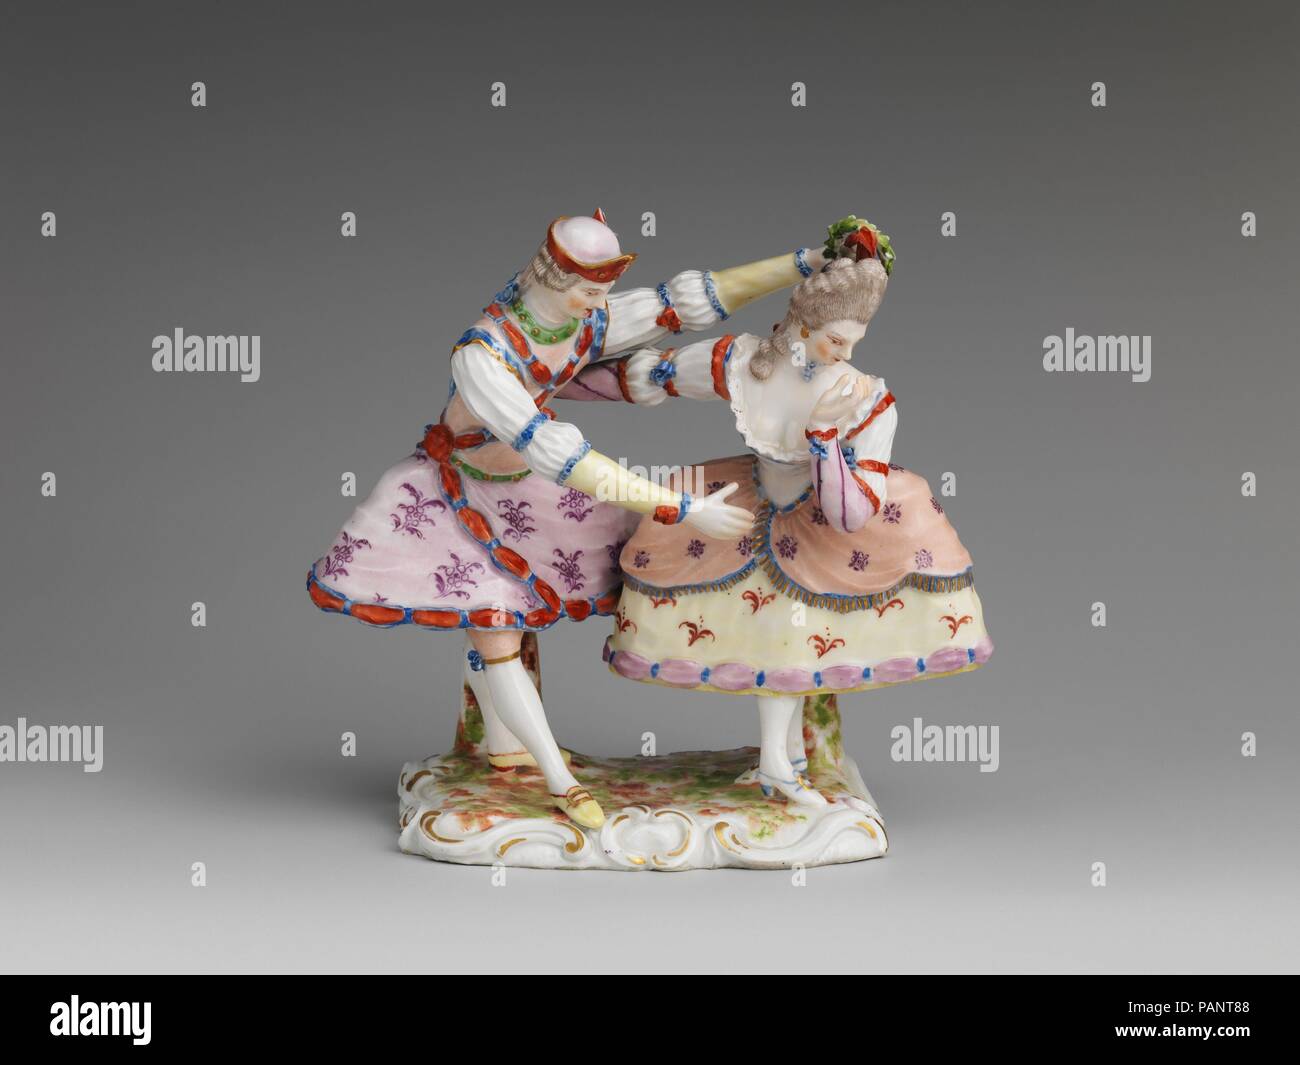 Pas de Deux. Culture: German, Ludwigsburg. Dimensions: Overall (confirmed): 5 15/16 x 6 3/8 x 3 9/16 in. (15.1 x 16.2 x 9 cm). Modeler: Joseph Nees (active 1758-73). Date: ca. 1760-63.  The founder of the Ludwigsburg factory, Duke Karl Eugen of Württemberg, was also the founder of what is now the Stuttgart Ballet. His enthusiastic patronage of both porcelain and the ballet is manifested in a series of models of single dancers, pas de deux, and pas de trois, all of which are undoubtedly based on the choreography of Jean-Georges Noverre, who created some nine ballets for Karl Eugen between 1760  Stock Photo